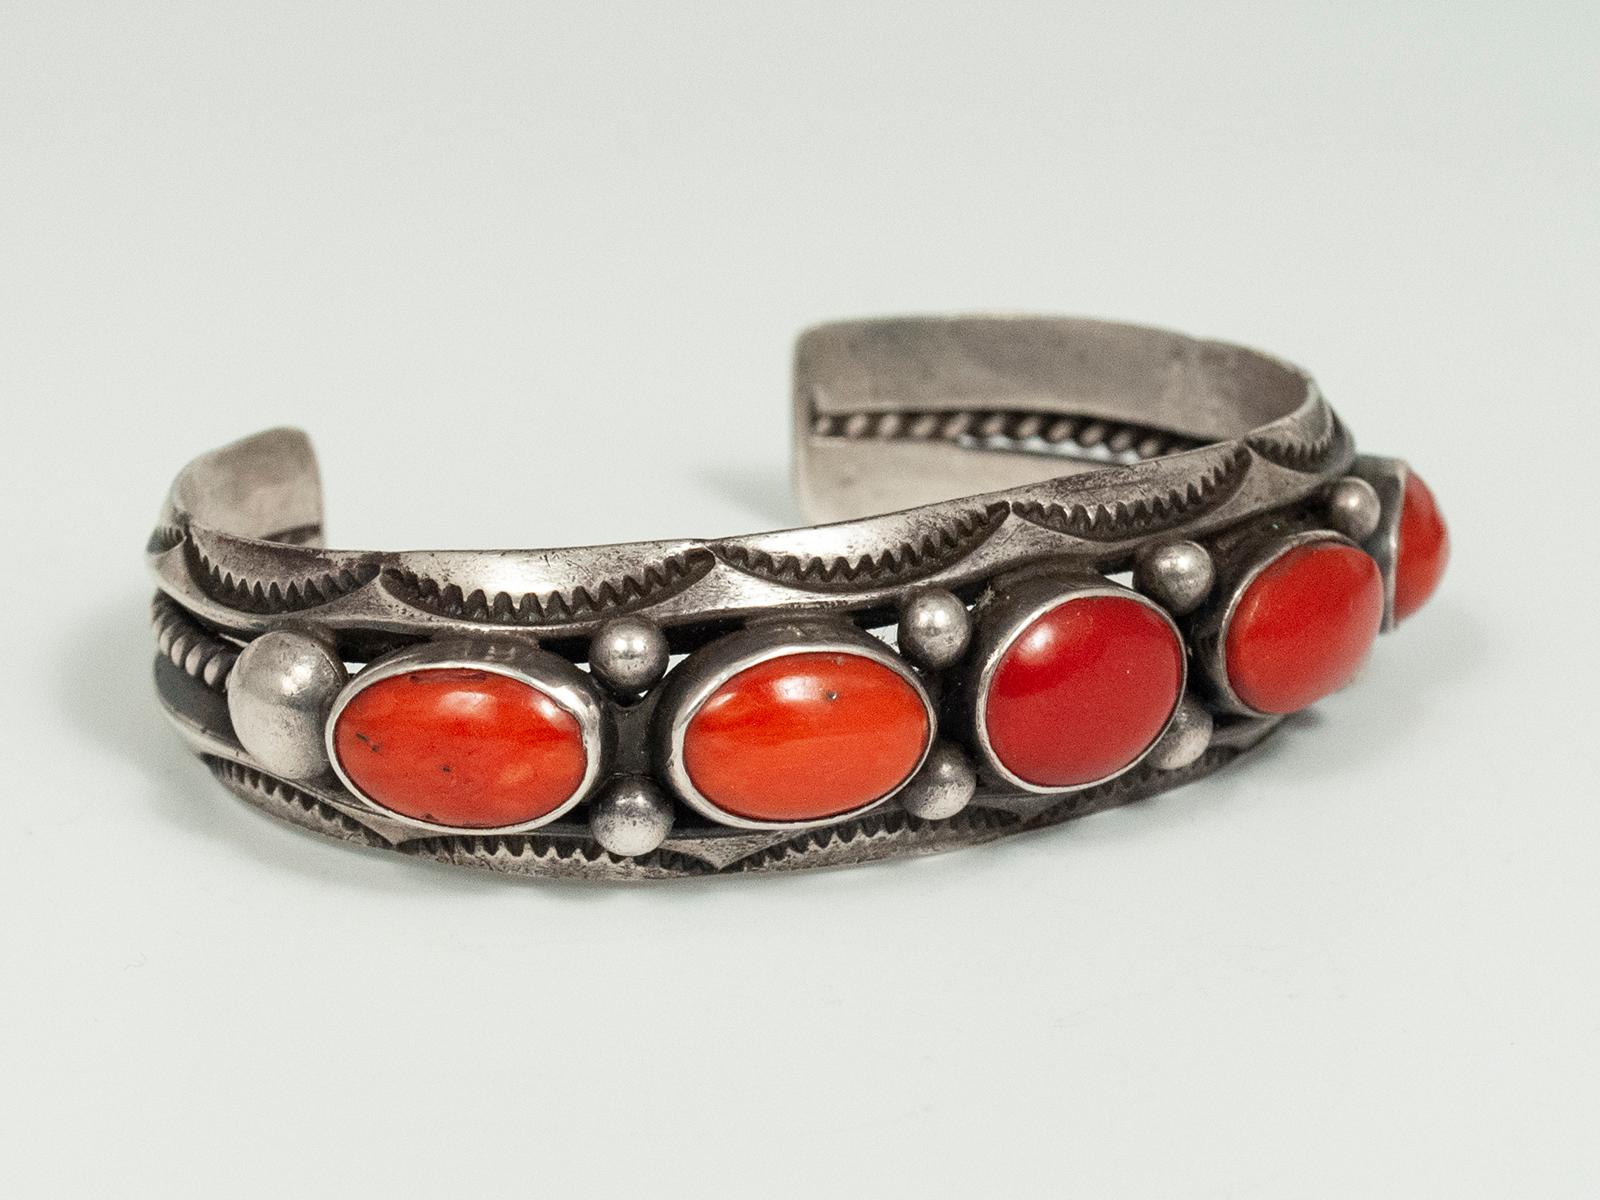 20th century coral and silver bracelet by Fred Thompson, Navajo Jeweler

Five gorgeous cabochons of rich red coral are set in silver bezels, flanked by silver beads and stamped crescents, in this classic bracelet created by master Navajo jeweler,